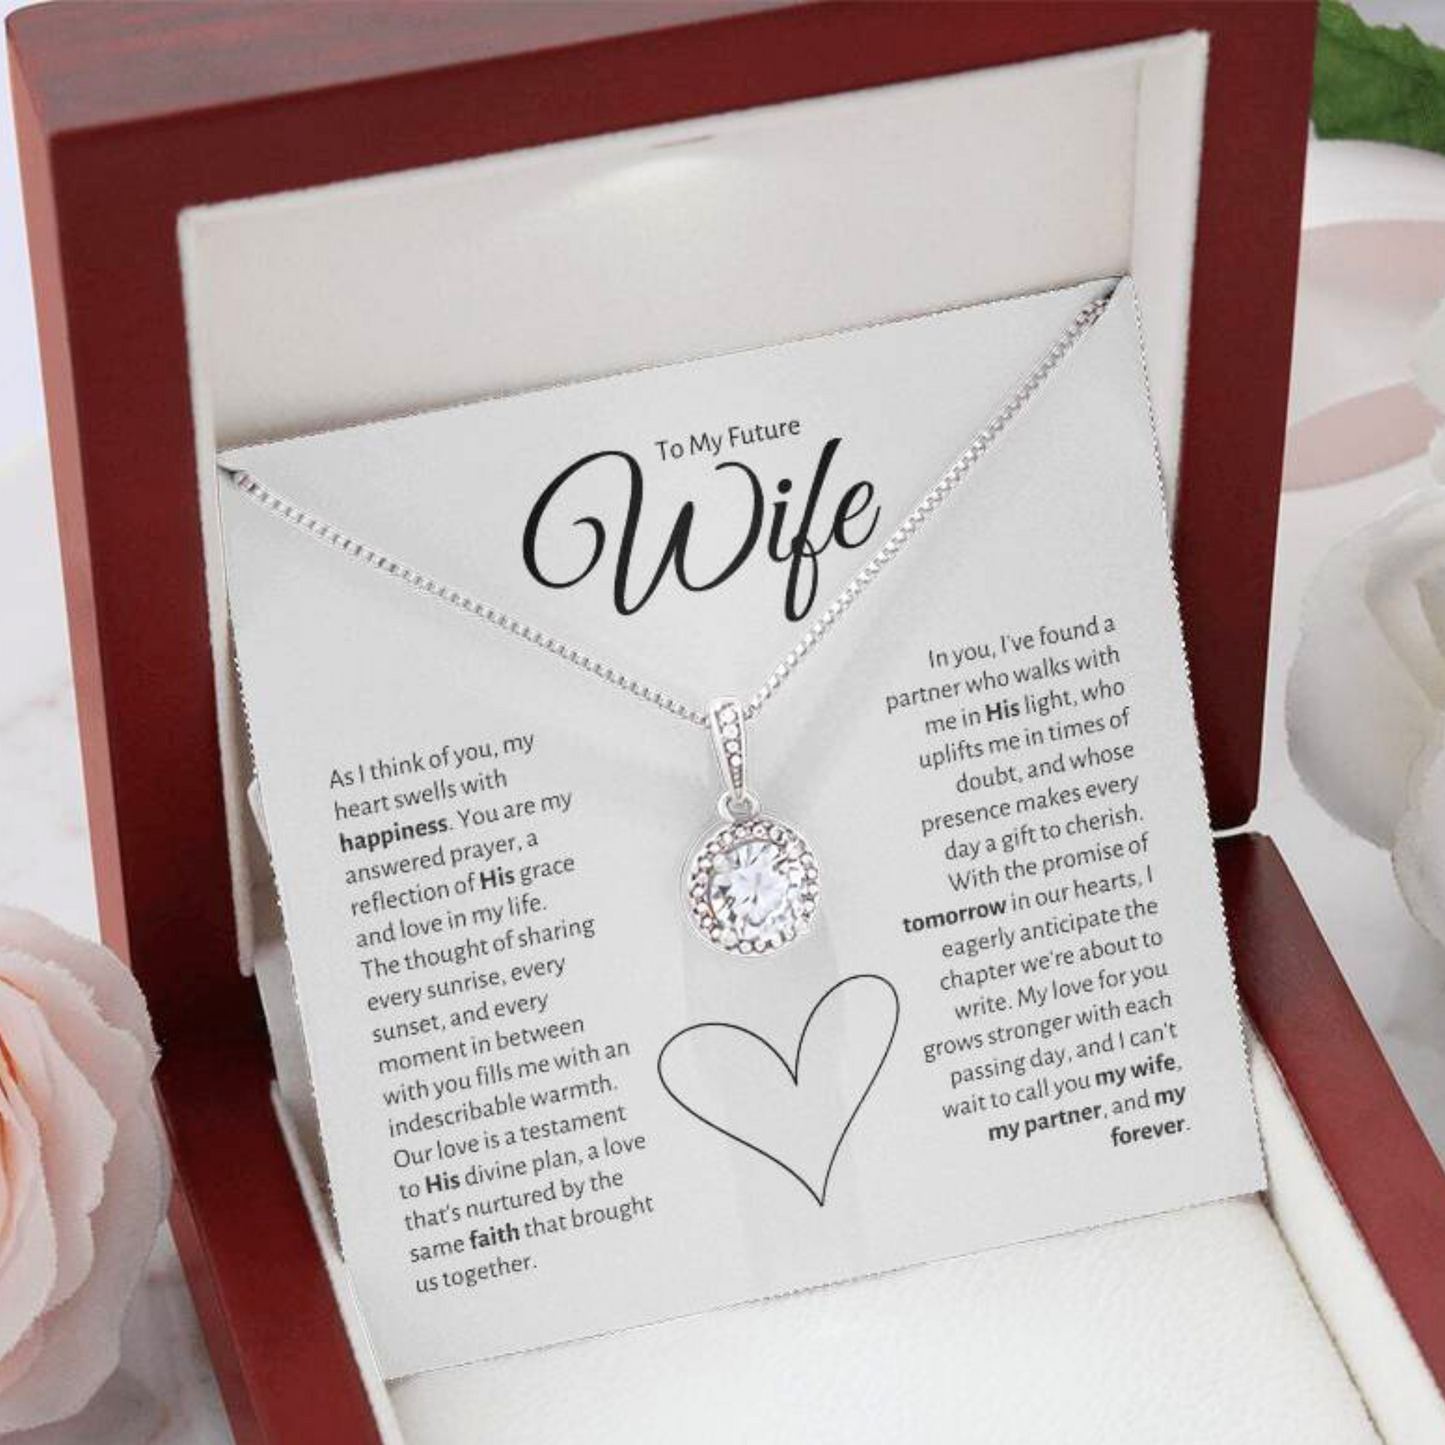 To My Future Wife, My Forever, Eternal Hope Necklace